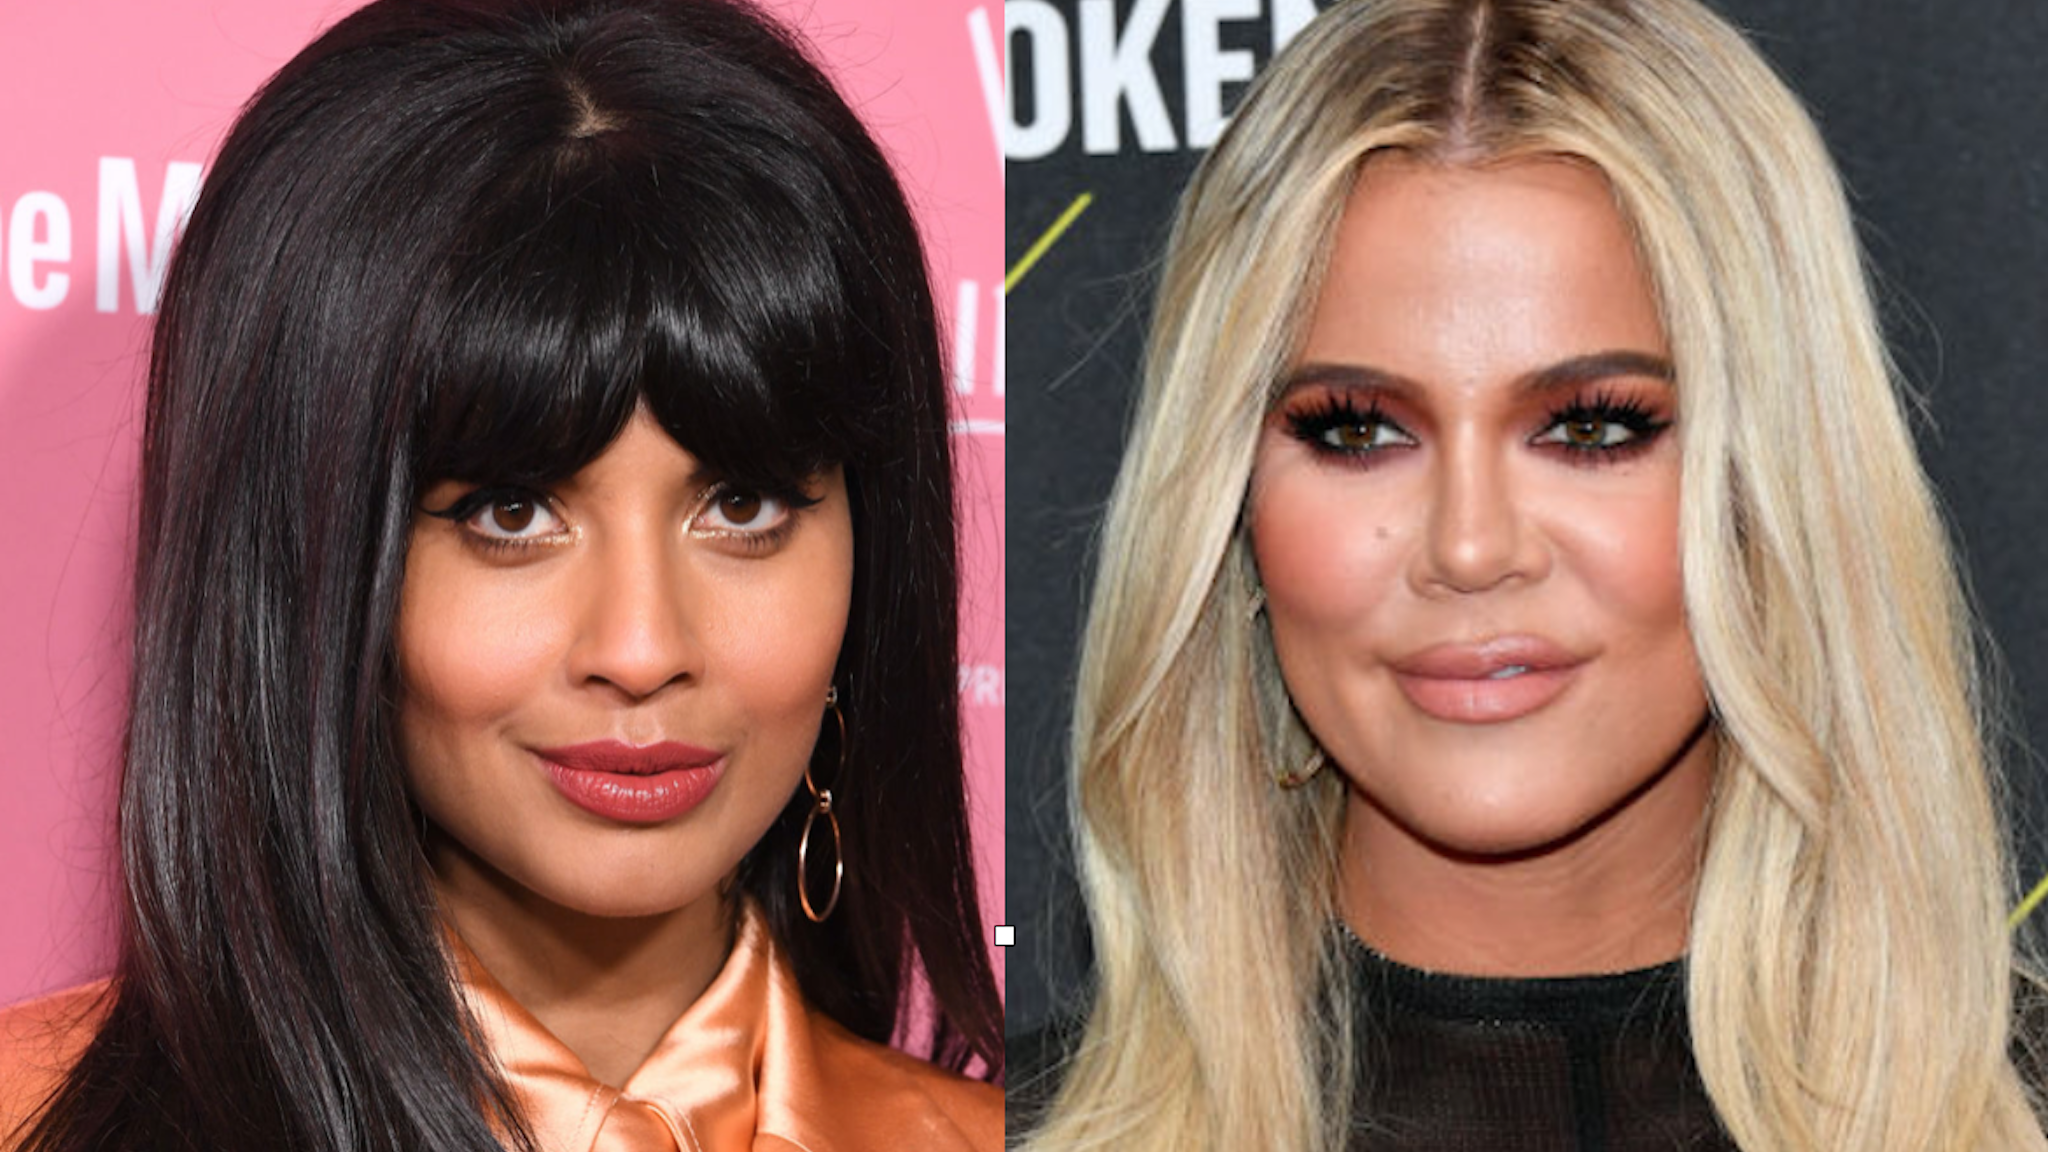 Jameela Jamil arrives at the 2019 Billboard Women In Music at Hollywood Palladium on December 12, 2019 in Los Angeles, California. //Khloé Kardashian arrives to the 2019 E! People's Choice Awards held at the Barker Hangar on November 10, 2019